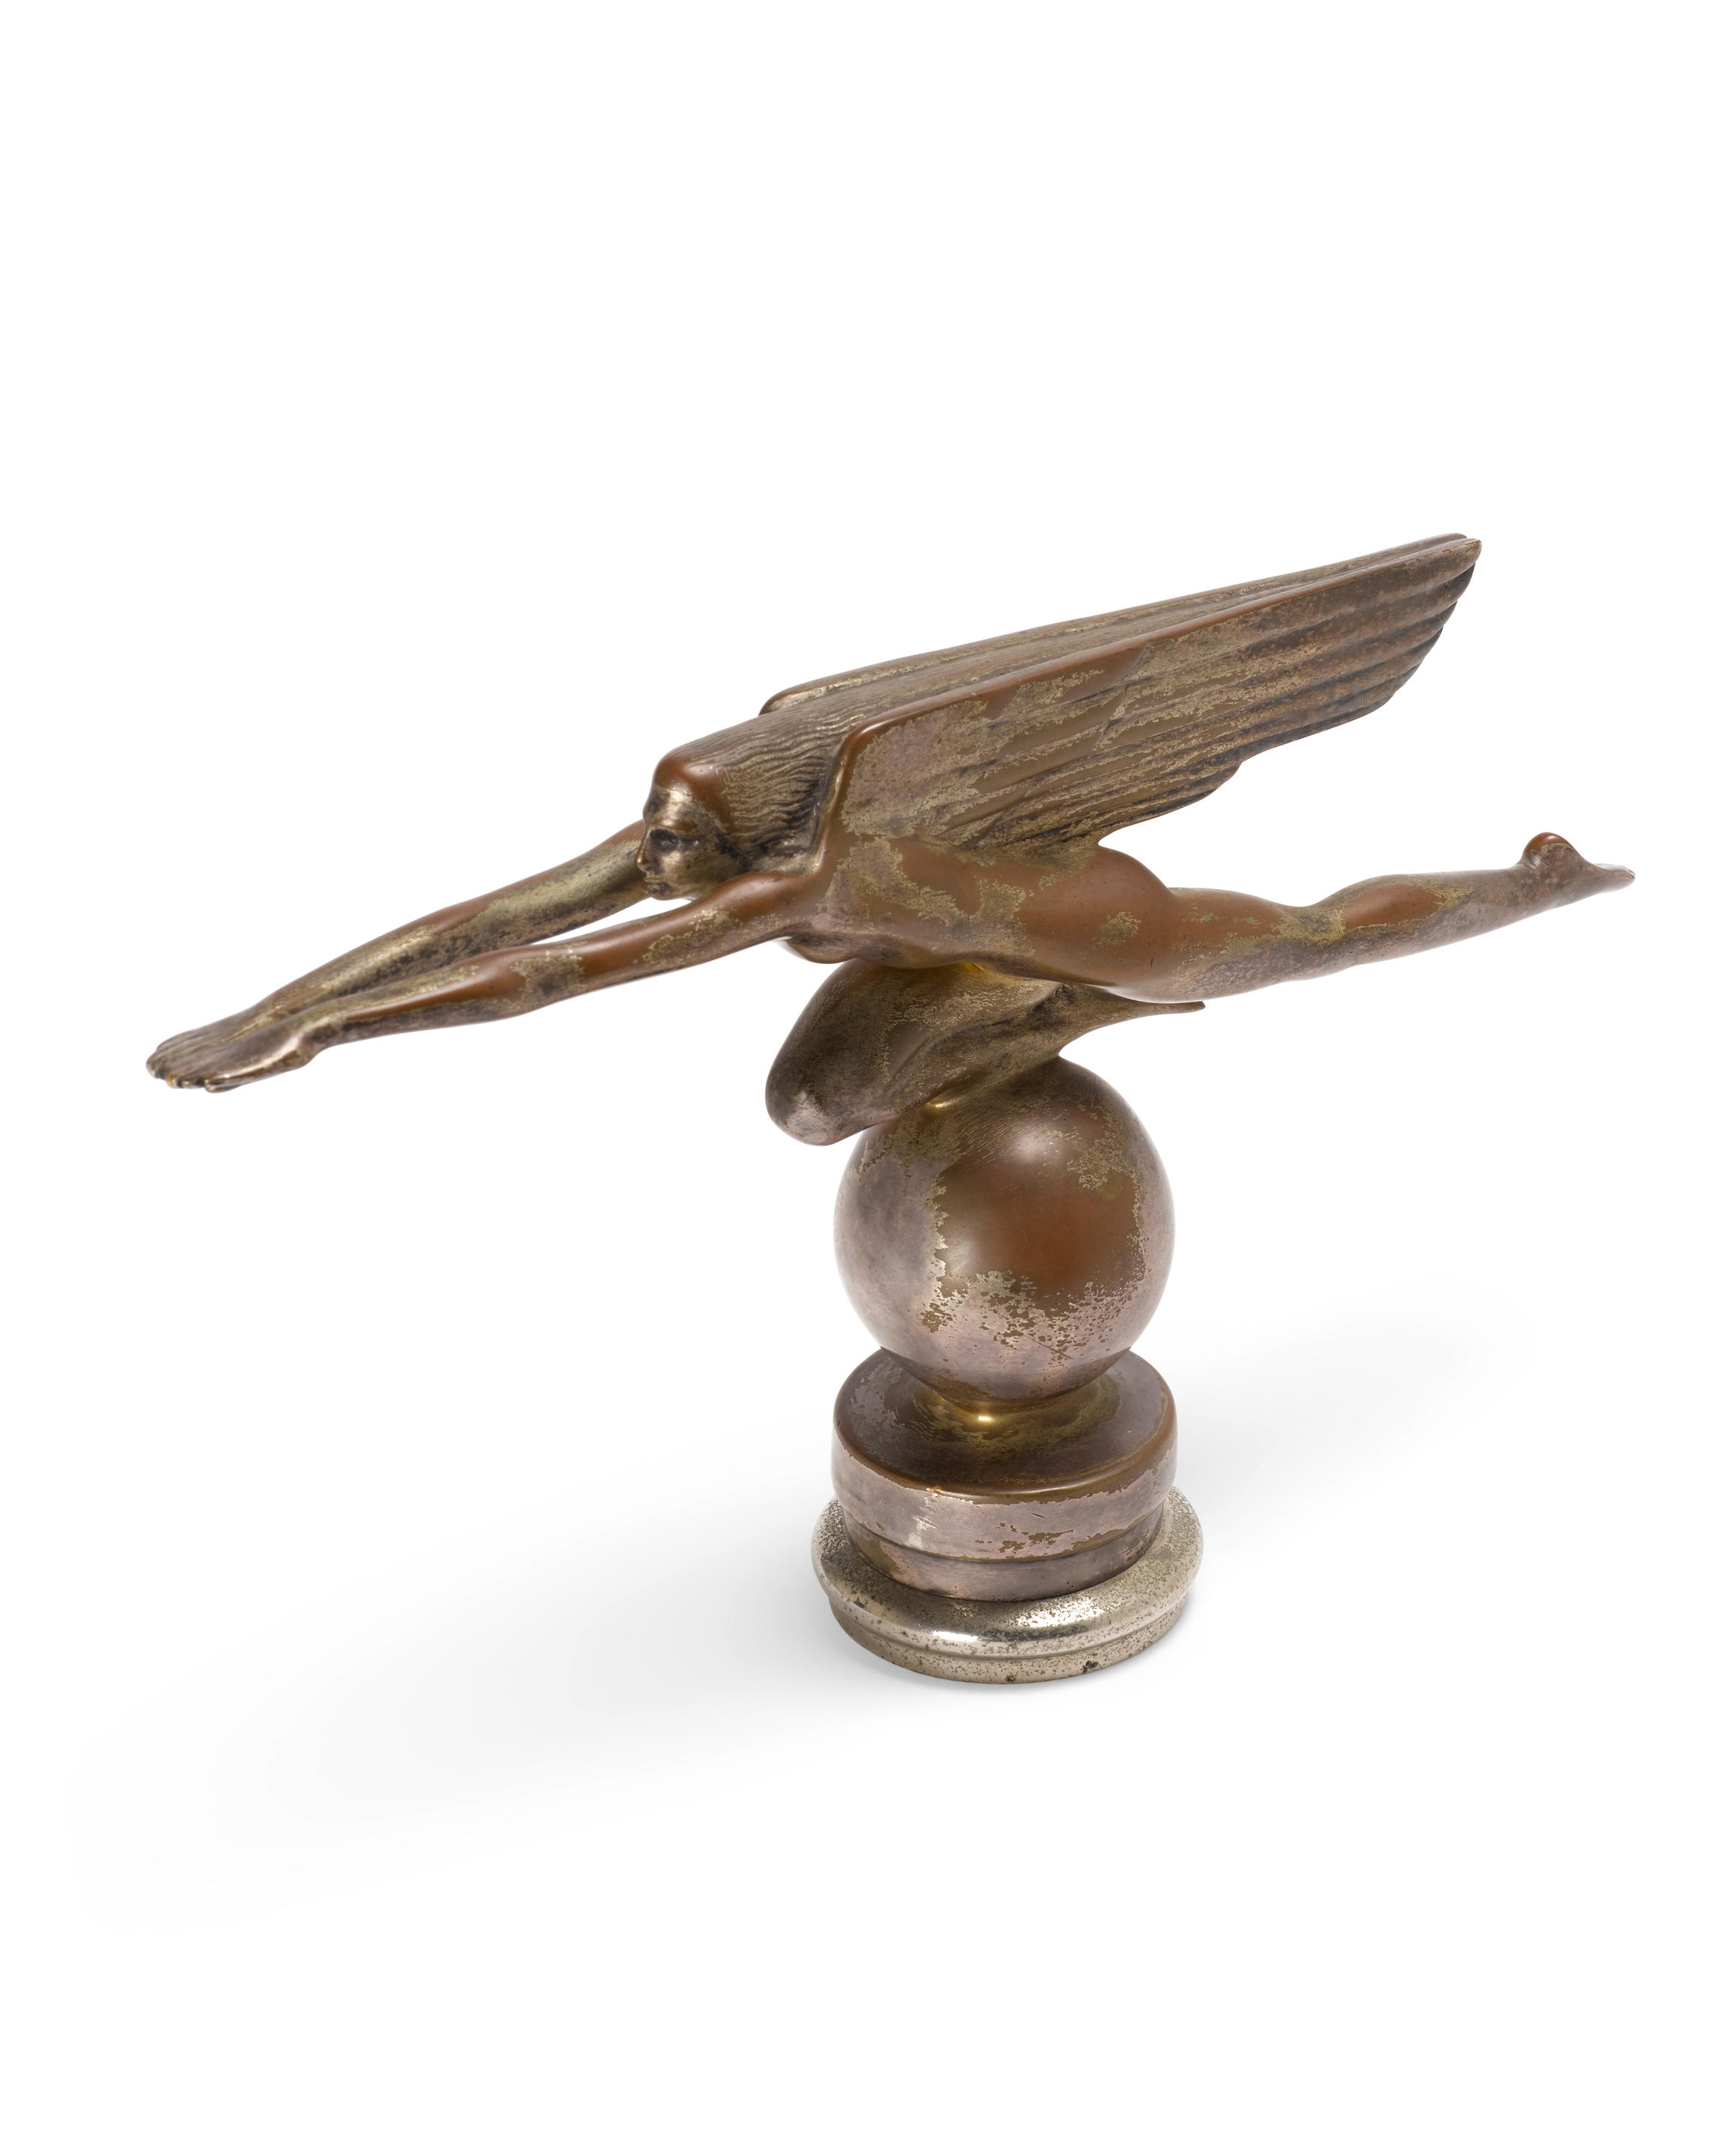 A fine and rare 'Speed' mascot by Harriet Whitney Frishmuth (1880-1980)